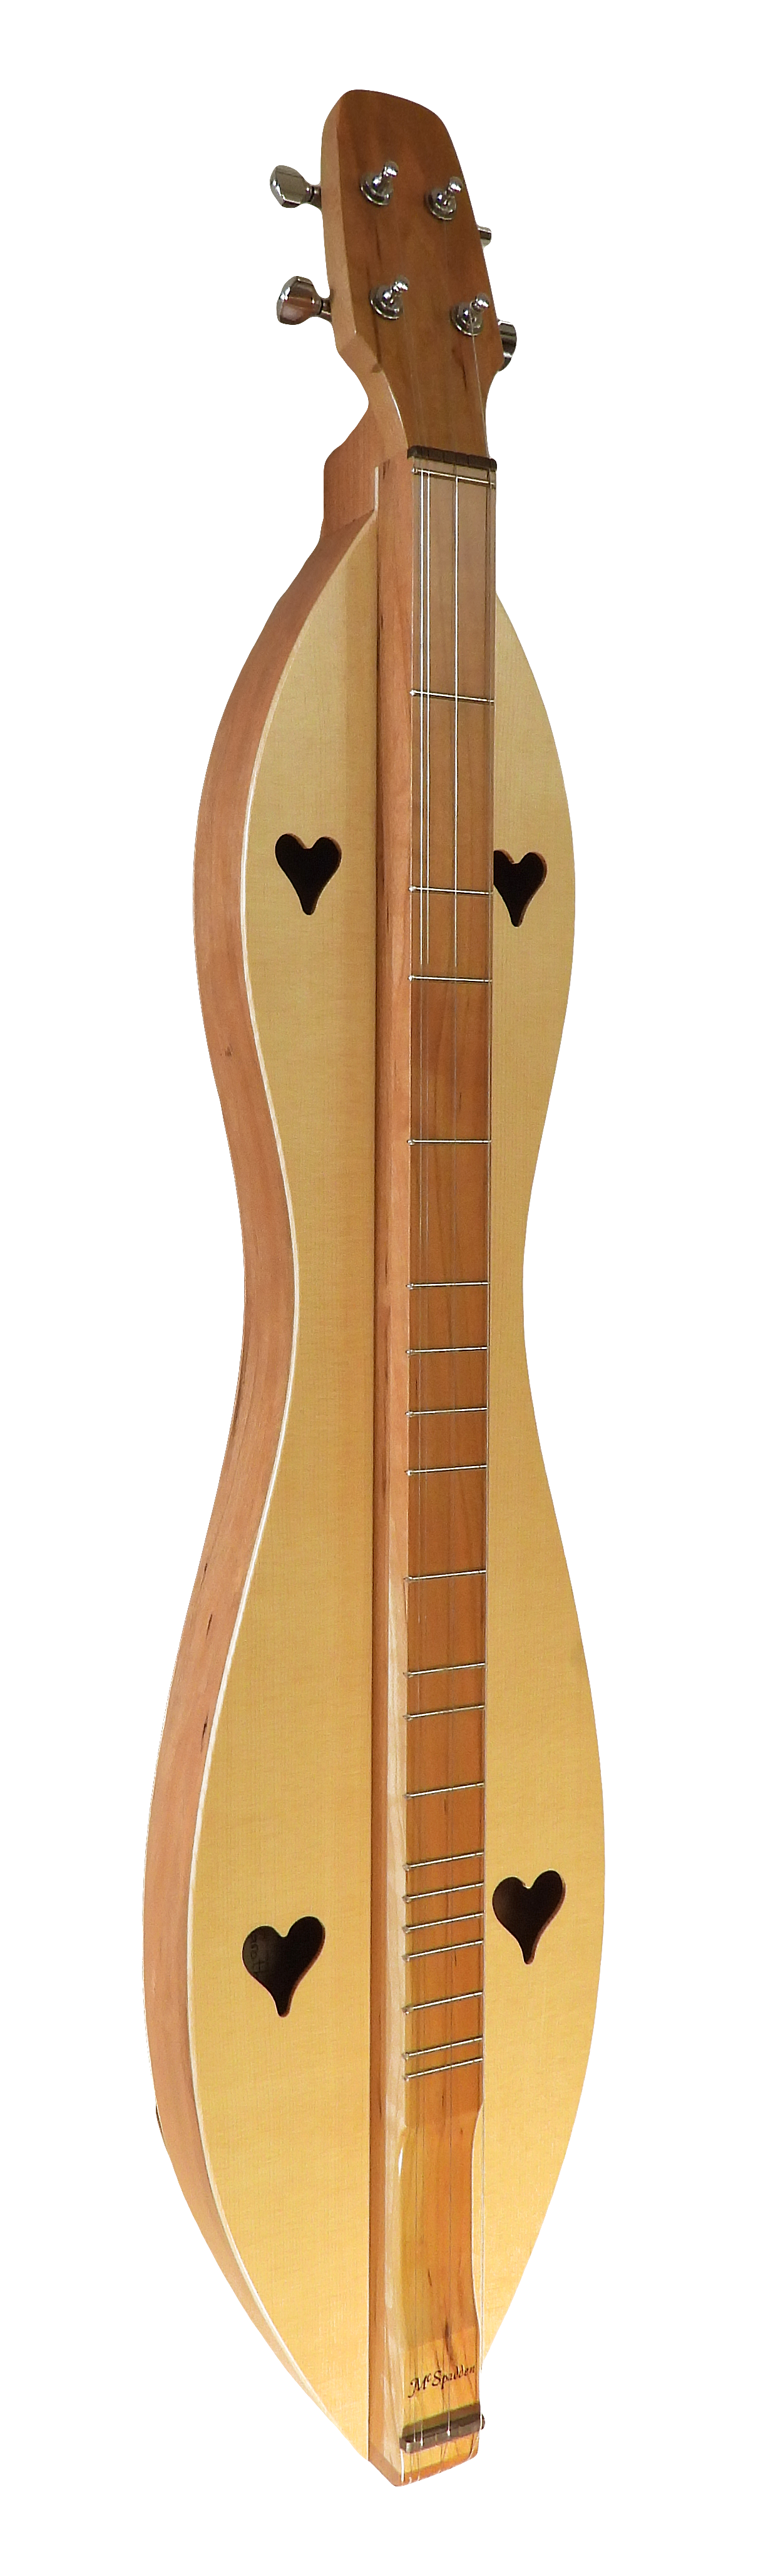 4 String, Flathead, Hourglass, with Cherry back and sides, Spruce top.  (4FHCS)